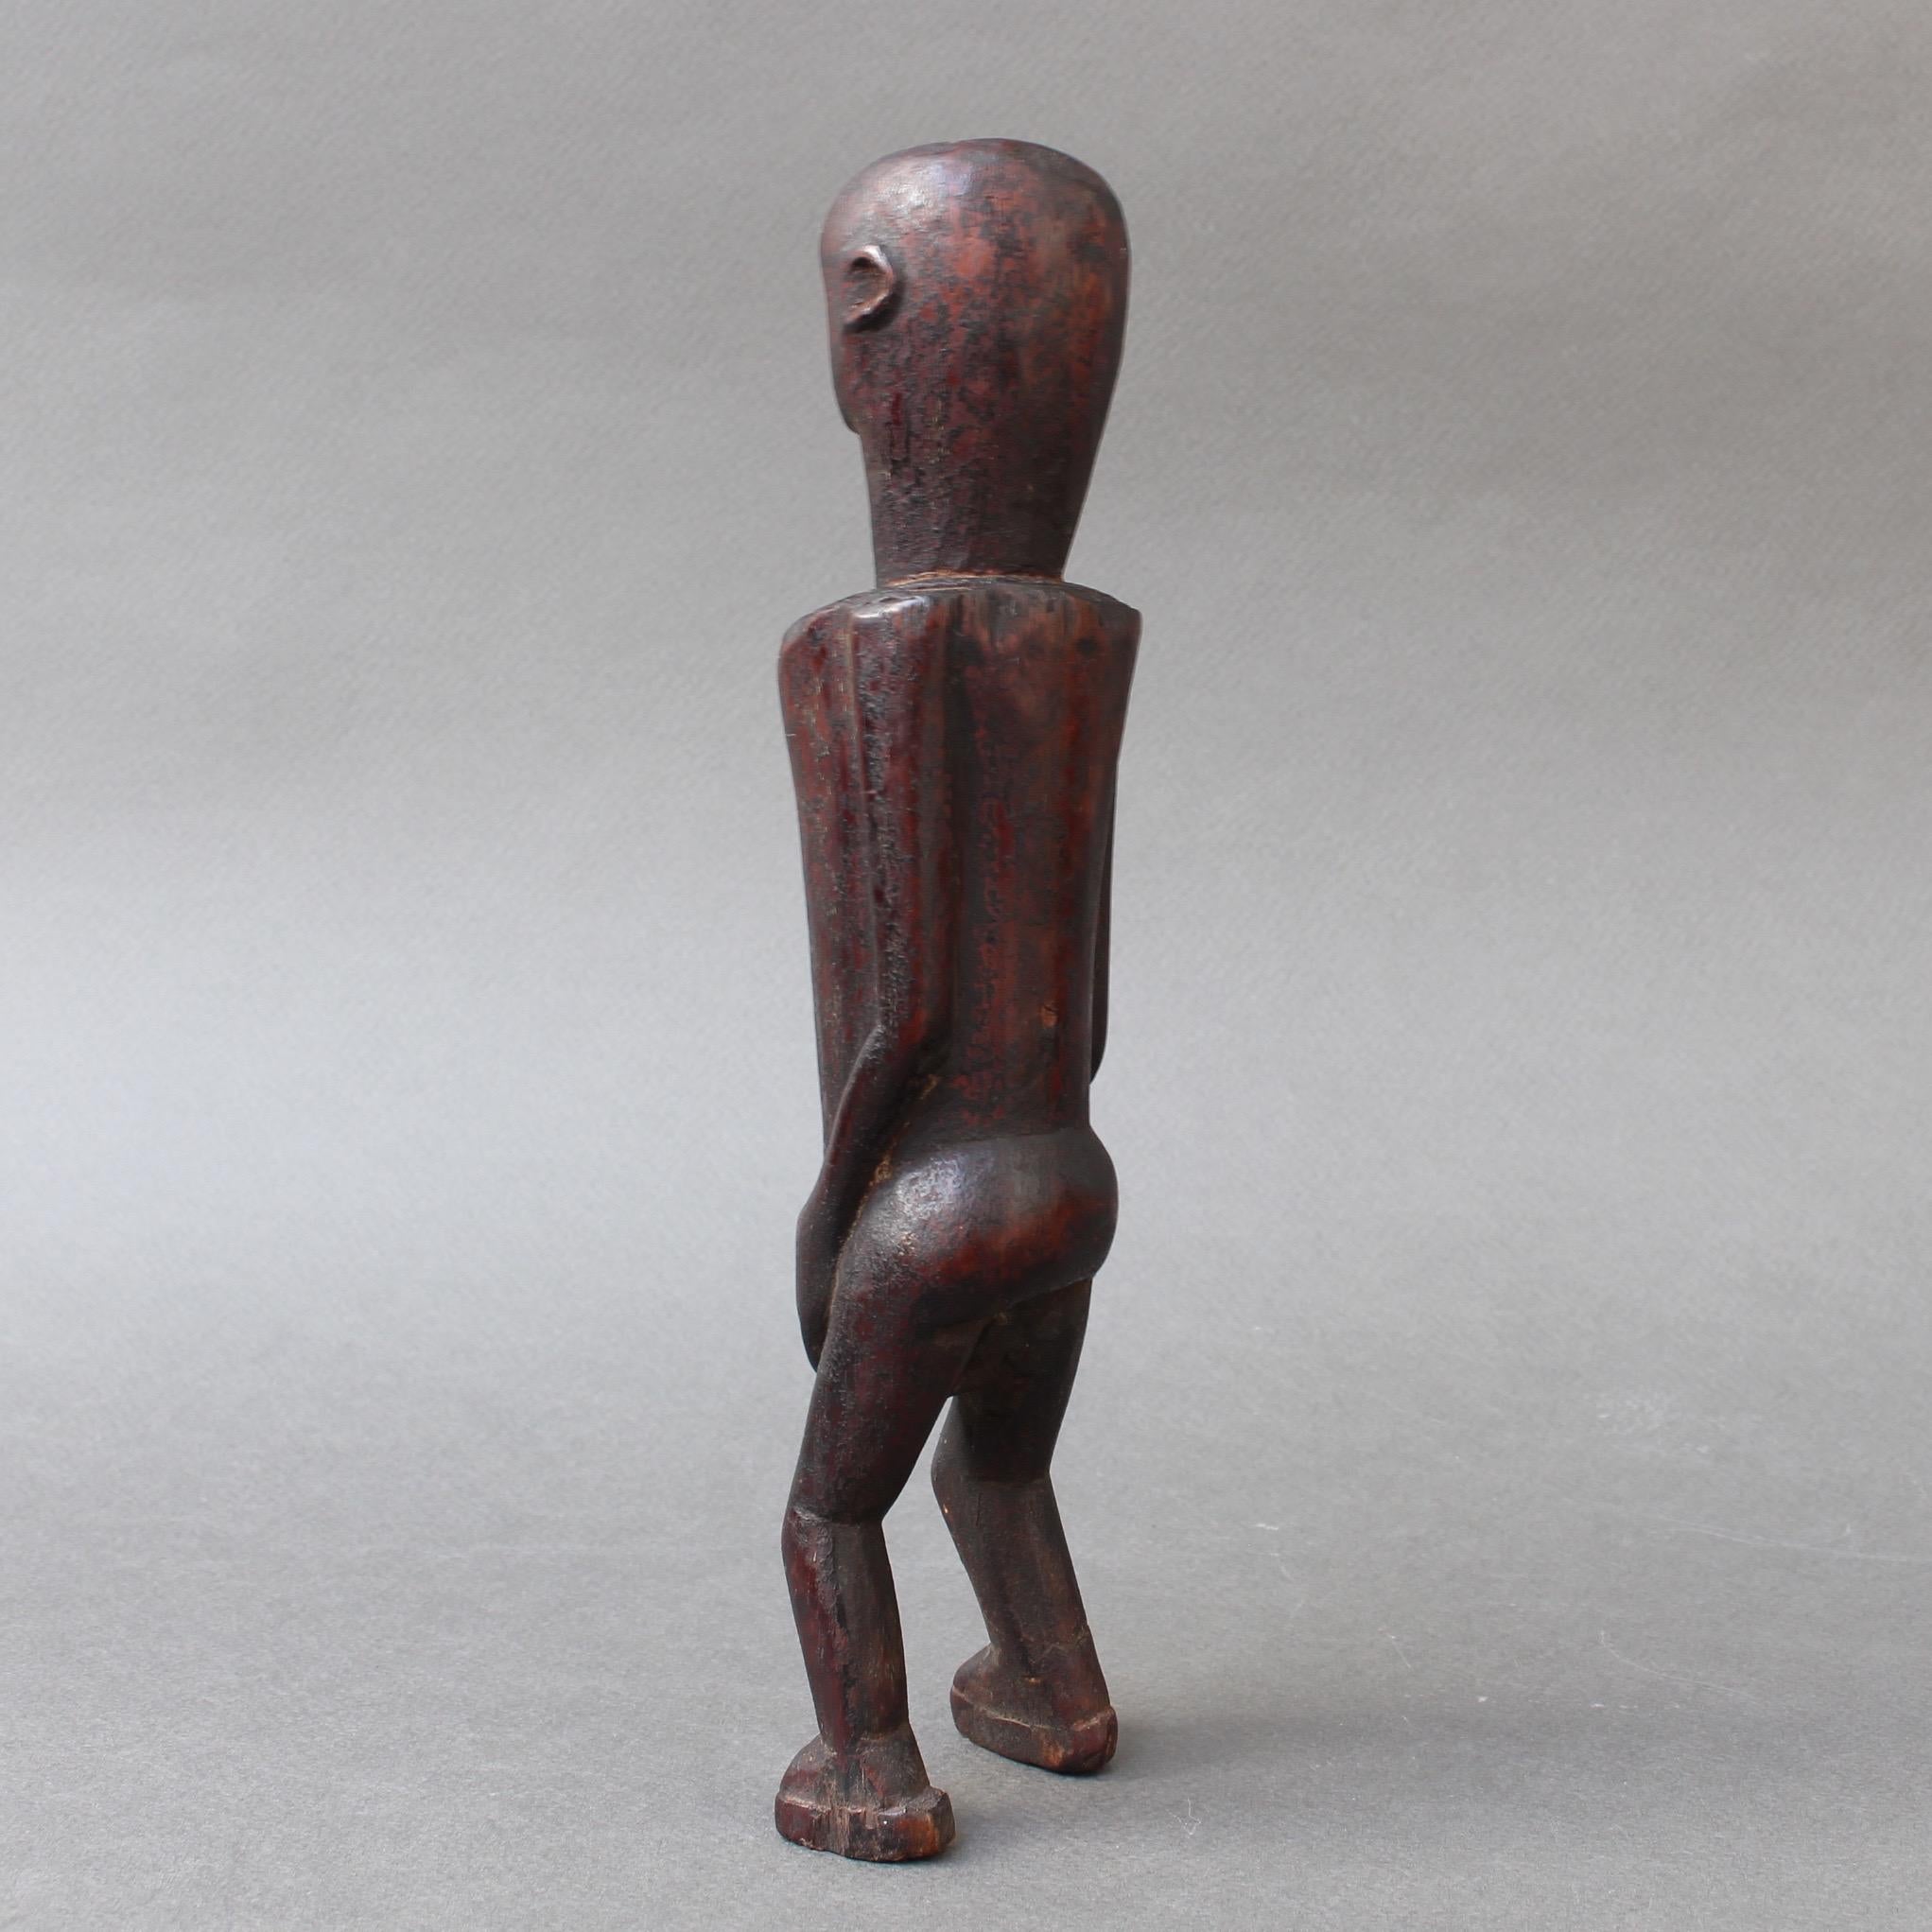 Hand-Carved Wooden Sculpture or Carving of Fertility Figure from Sumba Island, Indonesia